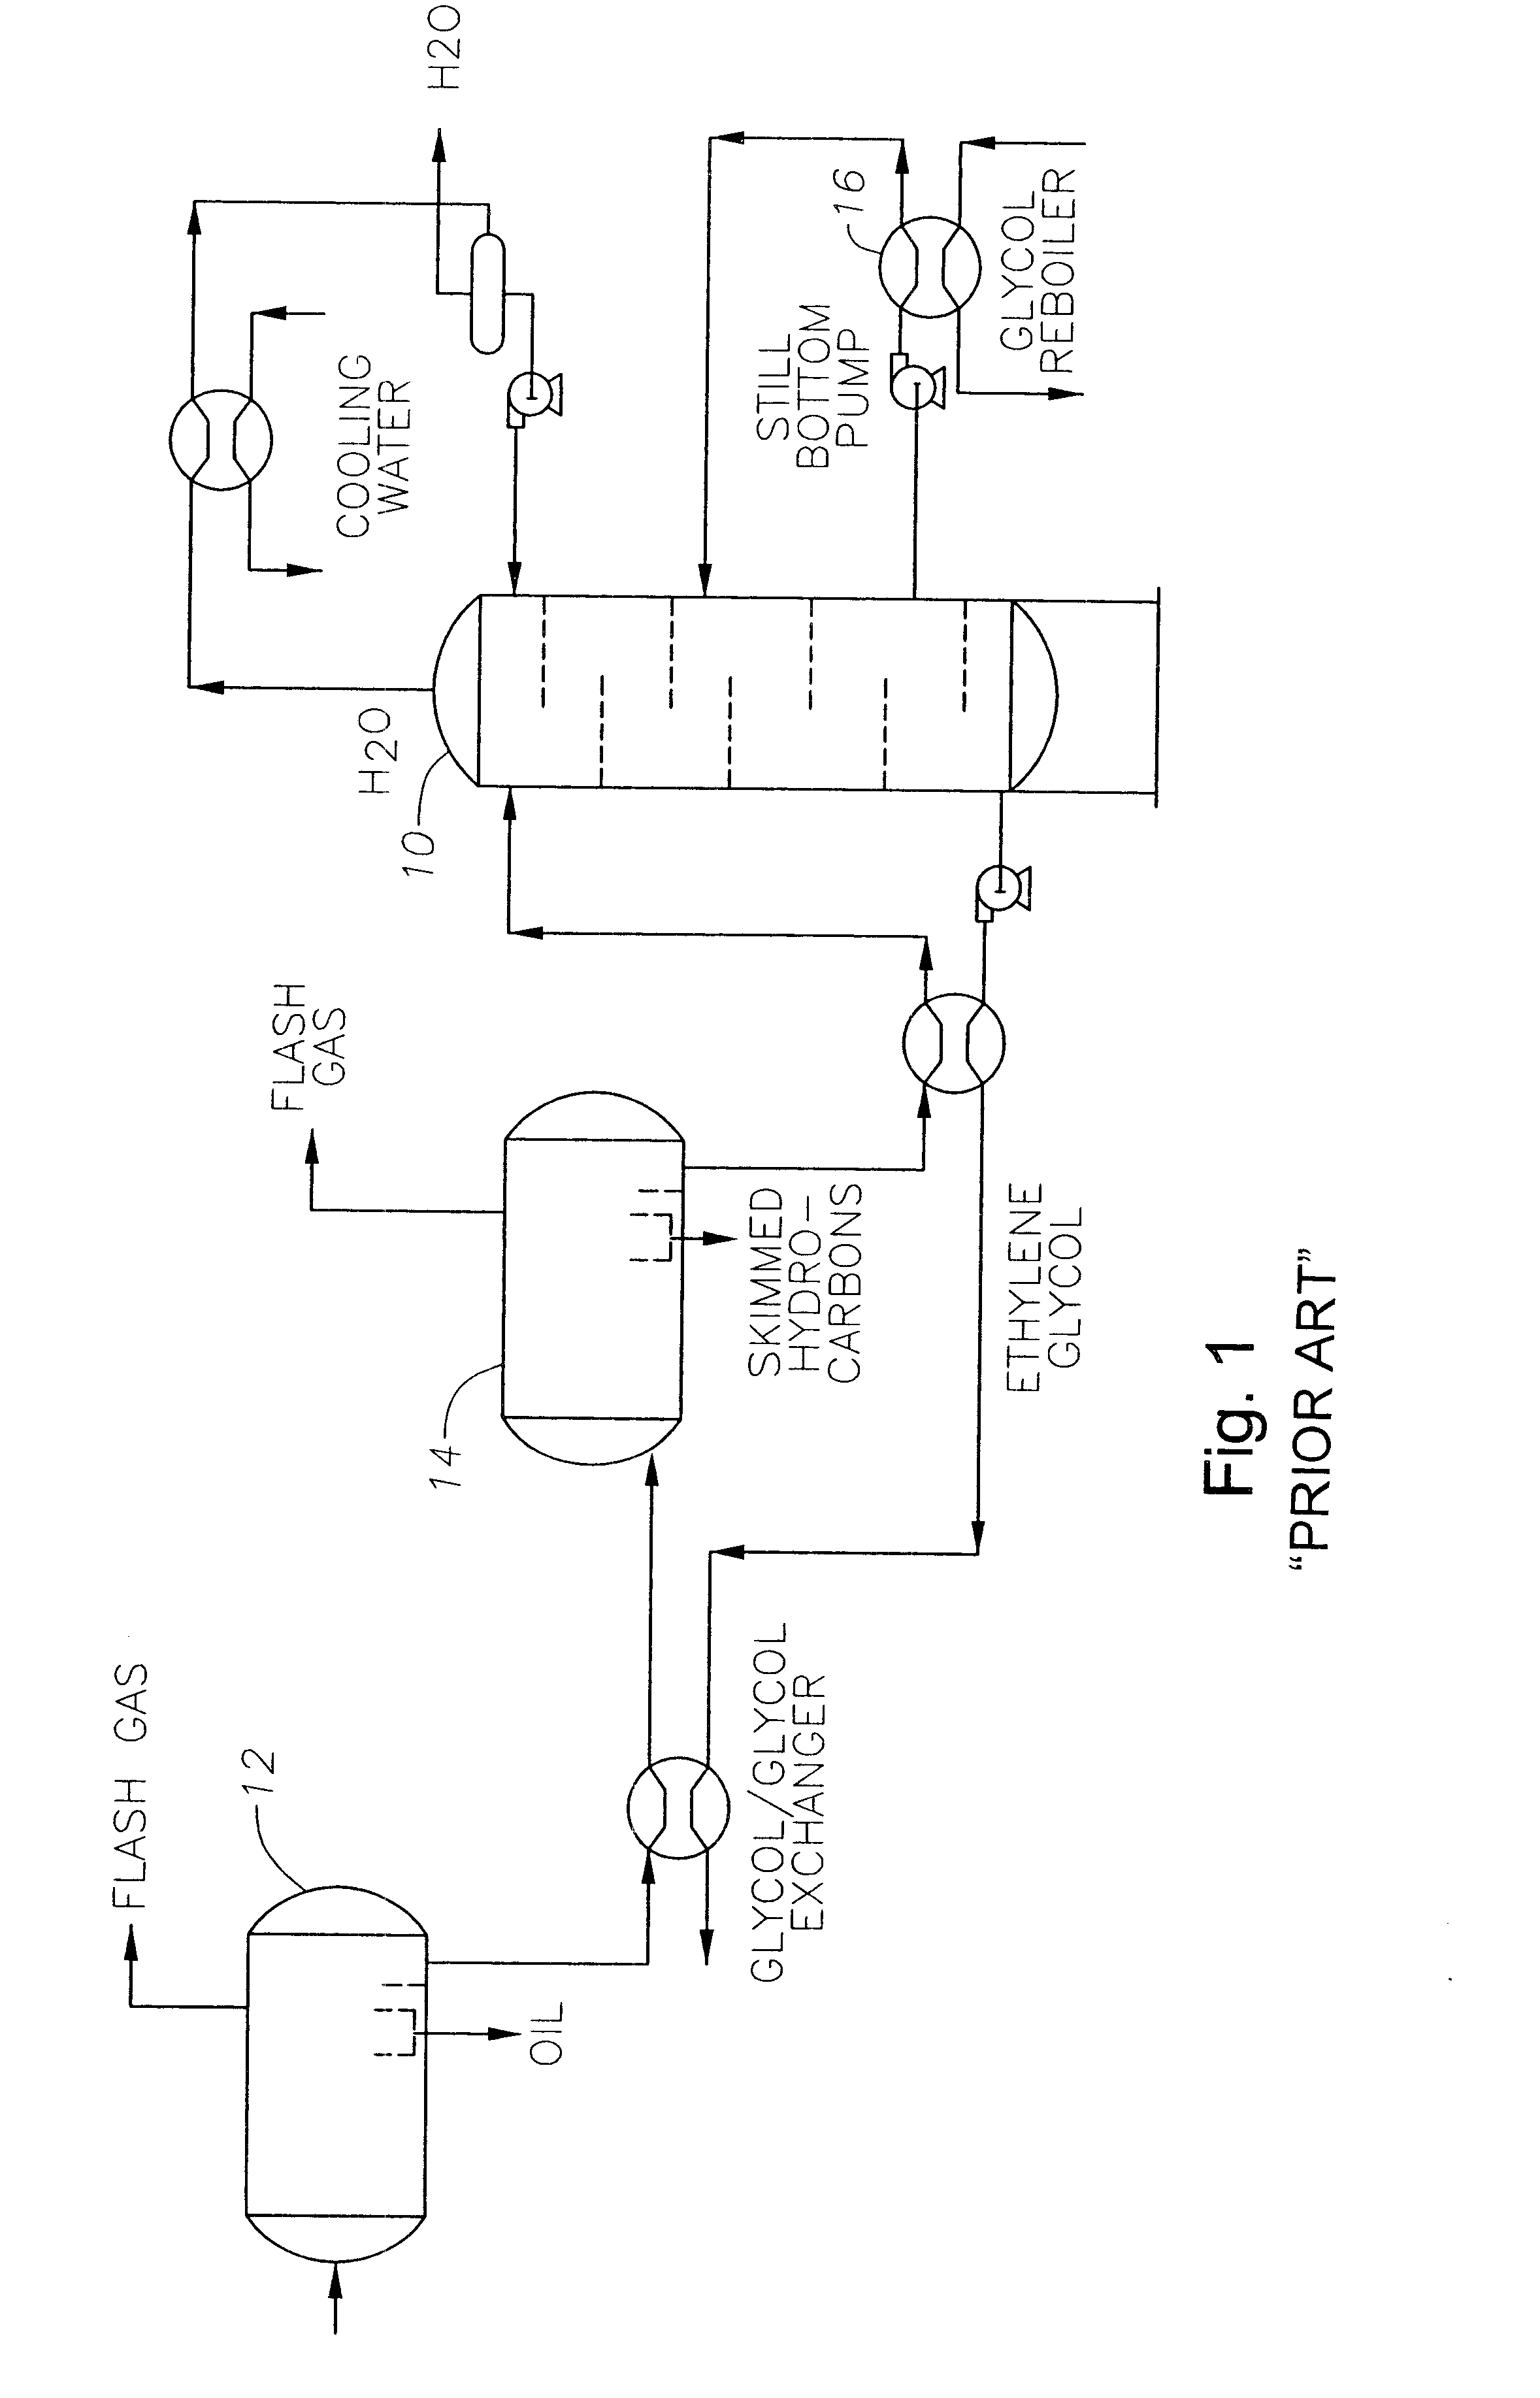 System for recovering glycol from glycol/brine streams